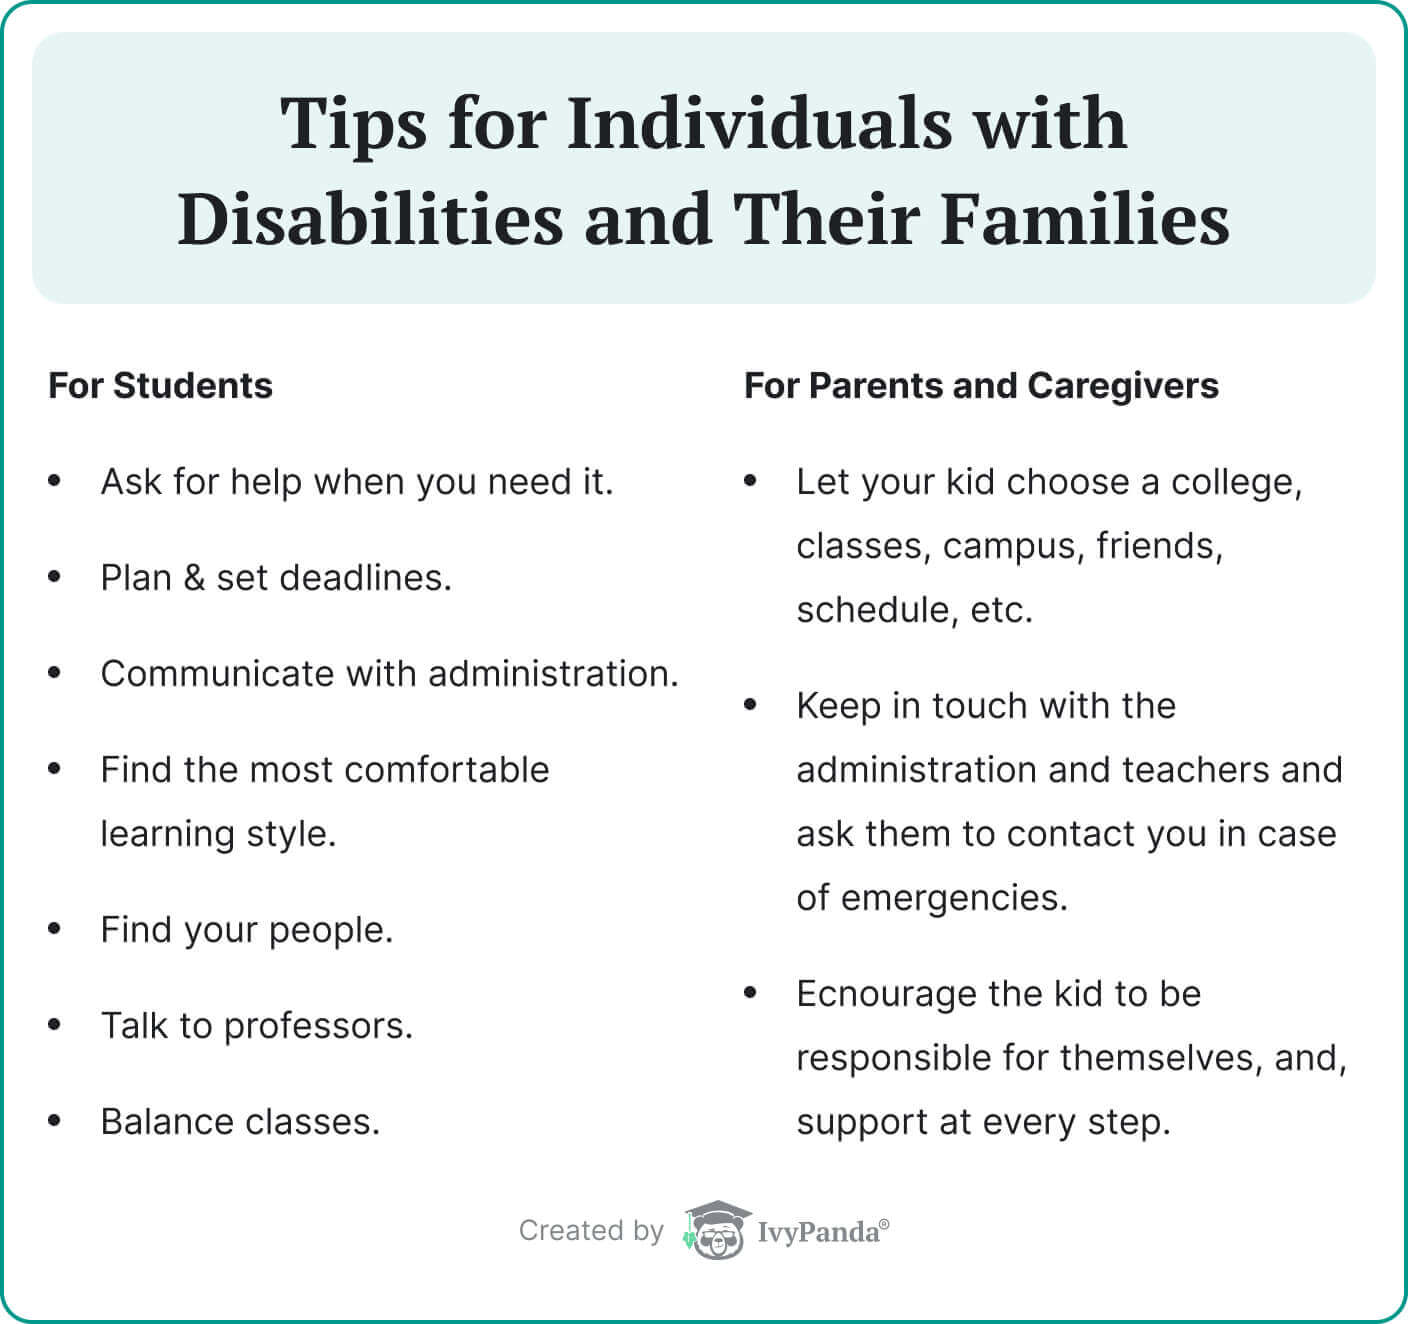 The picture provides essential tips for students with disabilities and their families.